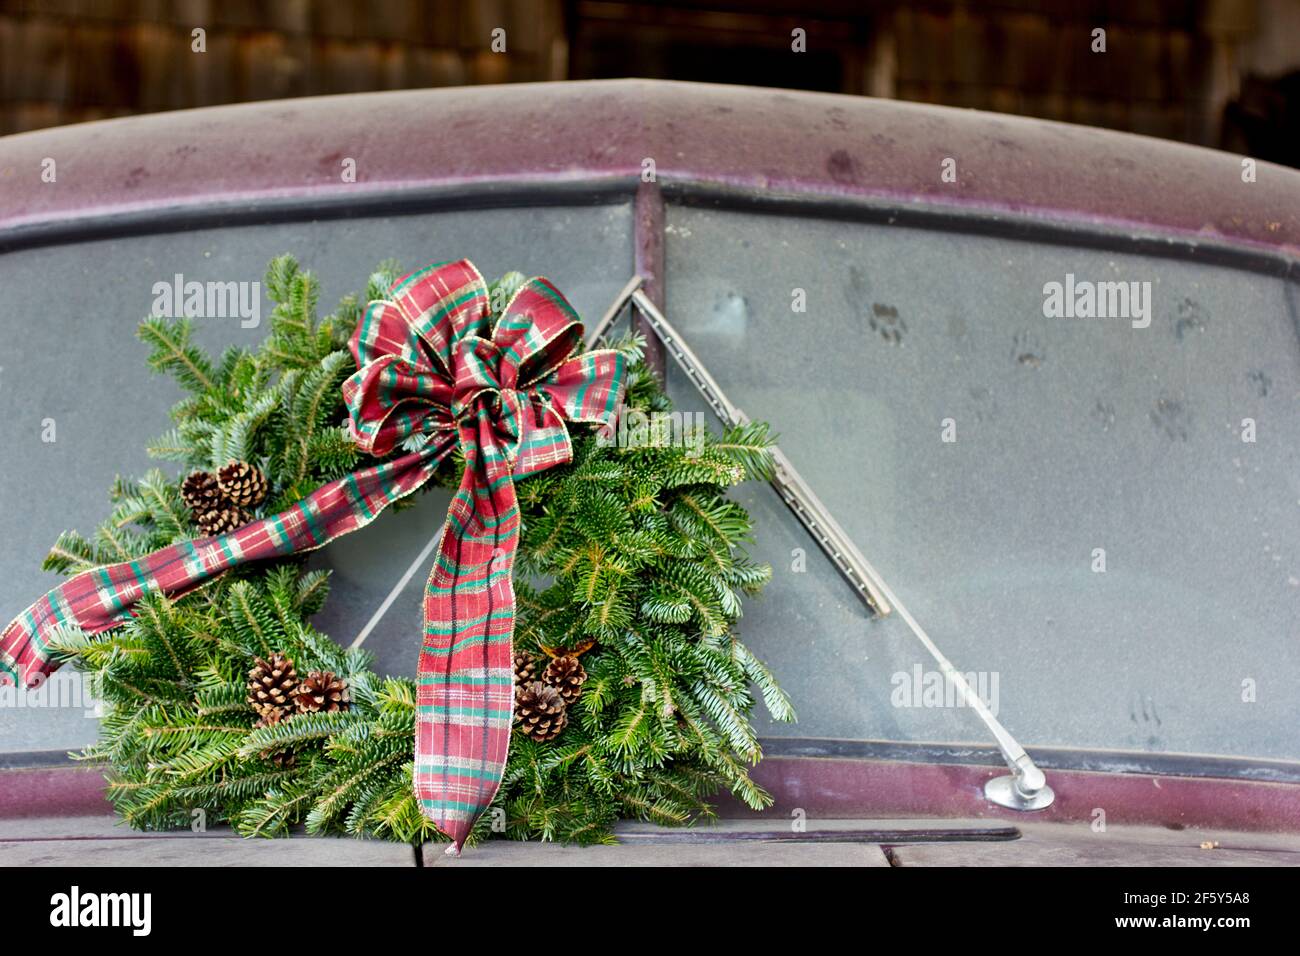 An old Dodge Truck is parked and ready for the holidays with a Winter Christmas Wreath on the front Stock Photo